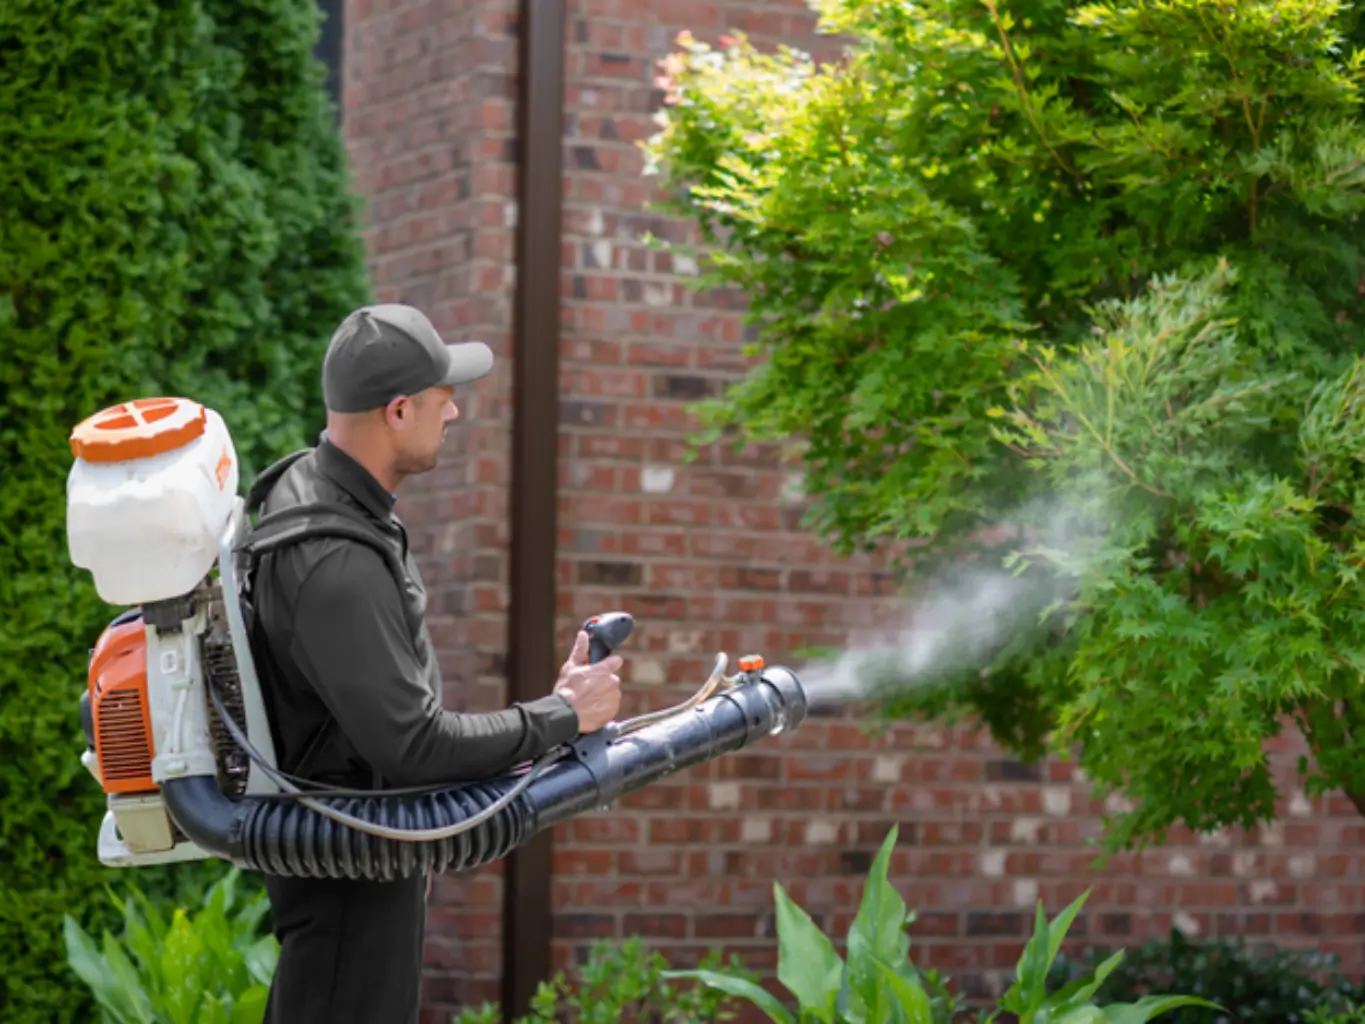 Mosquito Pest Control services by Petri Pest Control in South Florida